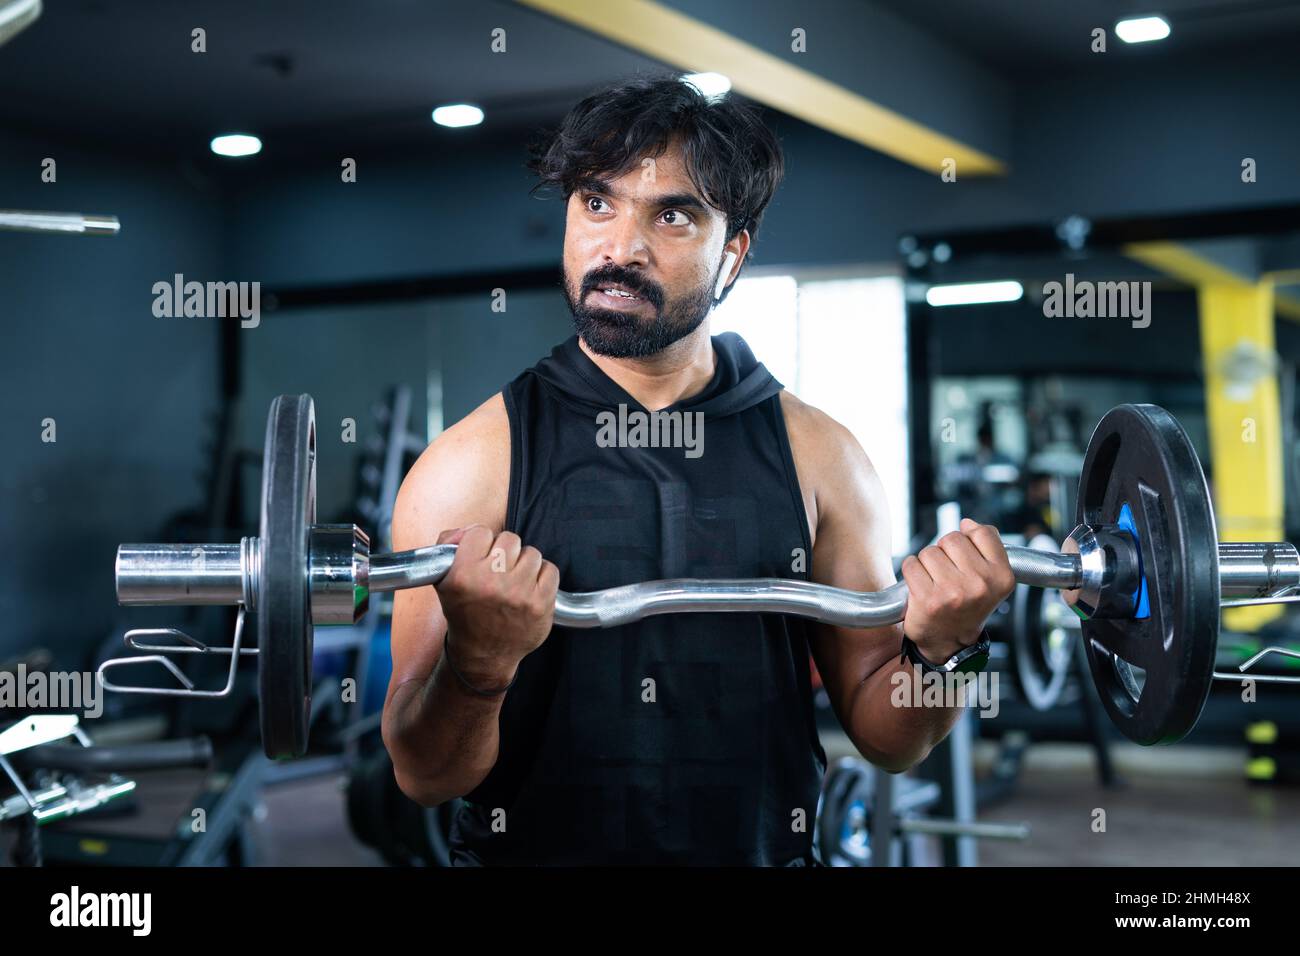 Young Indian bodybuilder busy doing biceps workout by lifting weight using barbells at gym - concept of musclebuilder exercising, healthy lifestyle Stock Photo